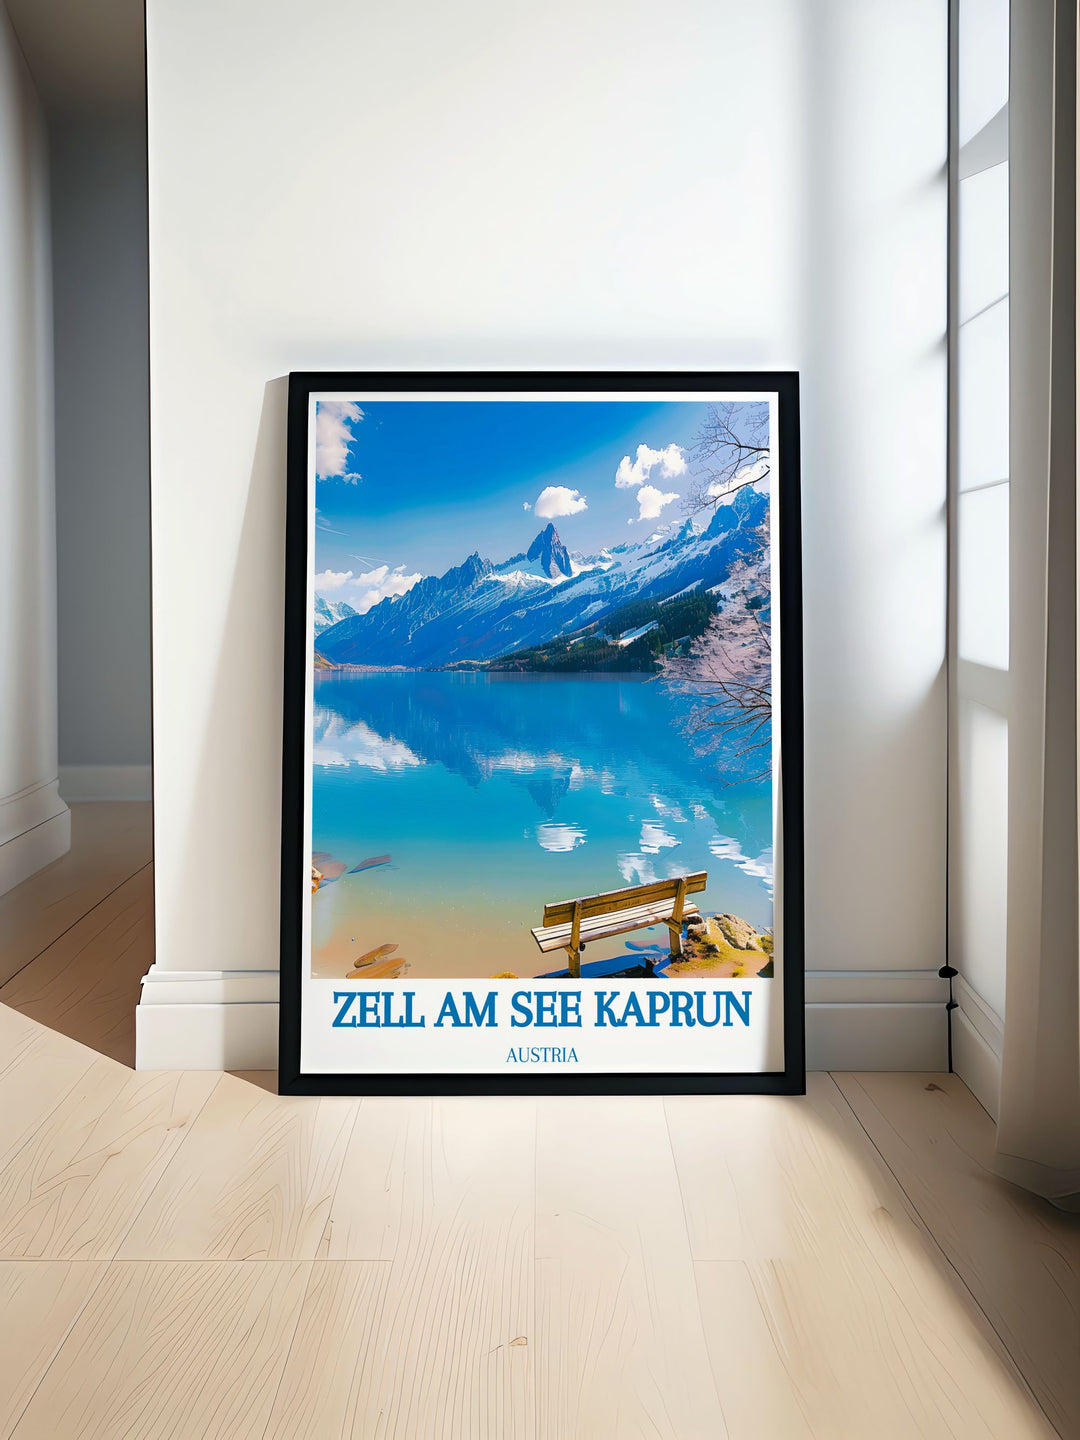 Discover the beauty of Zell am See Kaprun with this travel poster. The detailed illustration showcases the regions stunning alpine scenery, from the majestic peaks and glistening lake to the charming ski resort, inviting you to explore Austrias winter wonderland. This poster is a beautiful reminder of the serene and picturesque setting of Zell am See Kaprun.